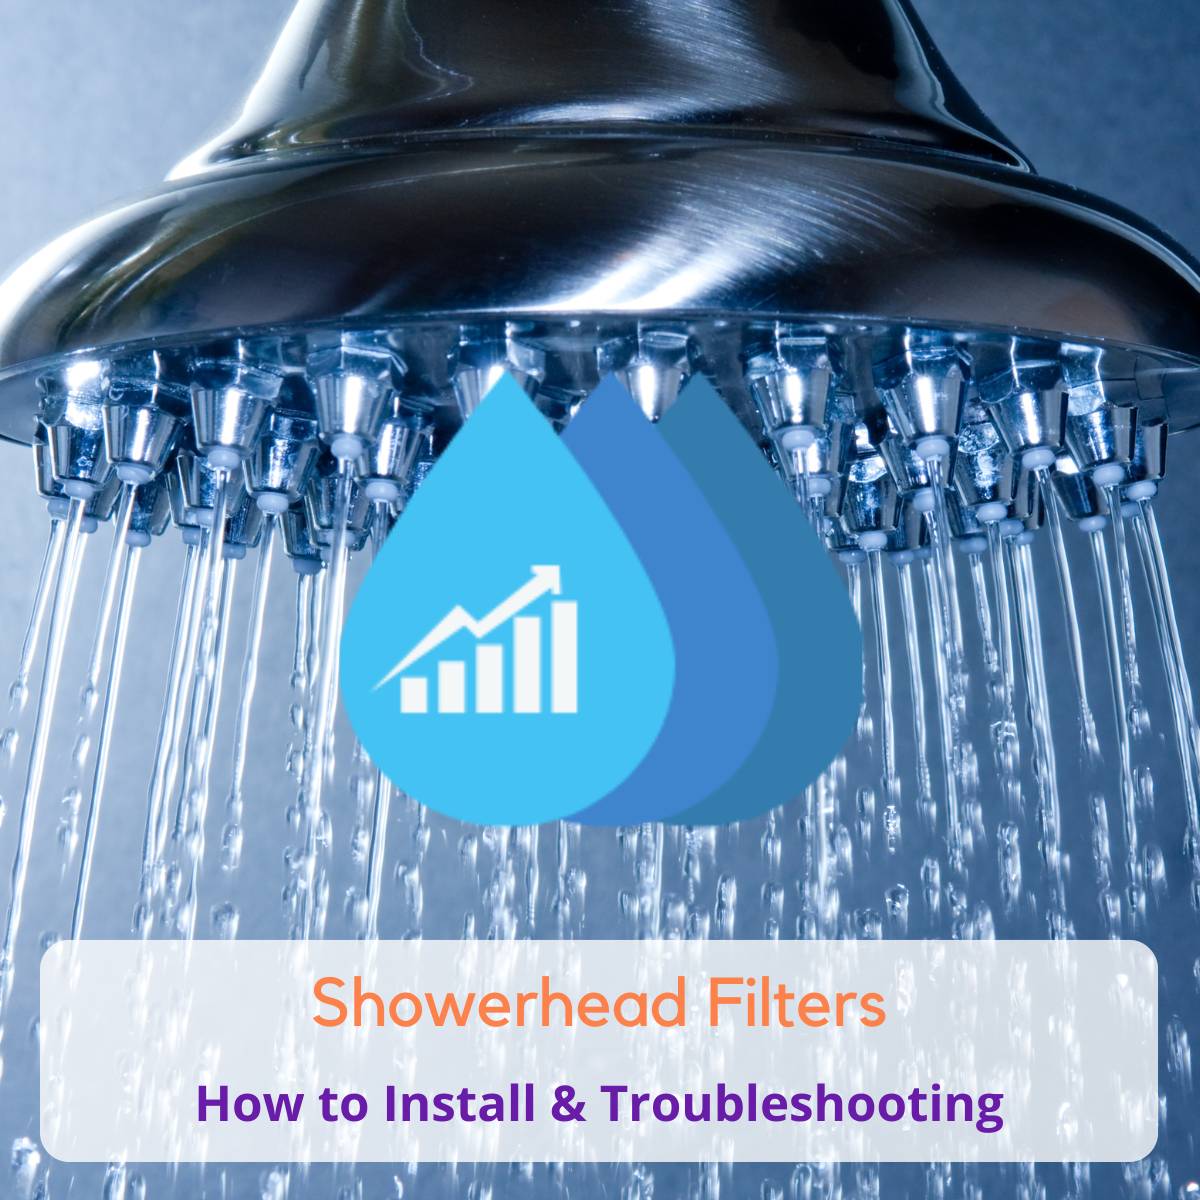 How to Install a Showerhead Filter (8 Easy Steps)